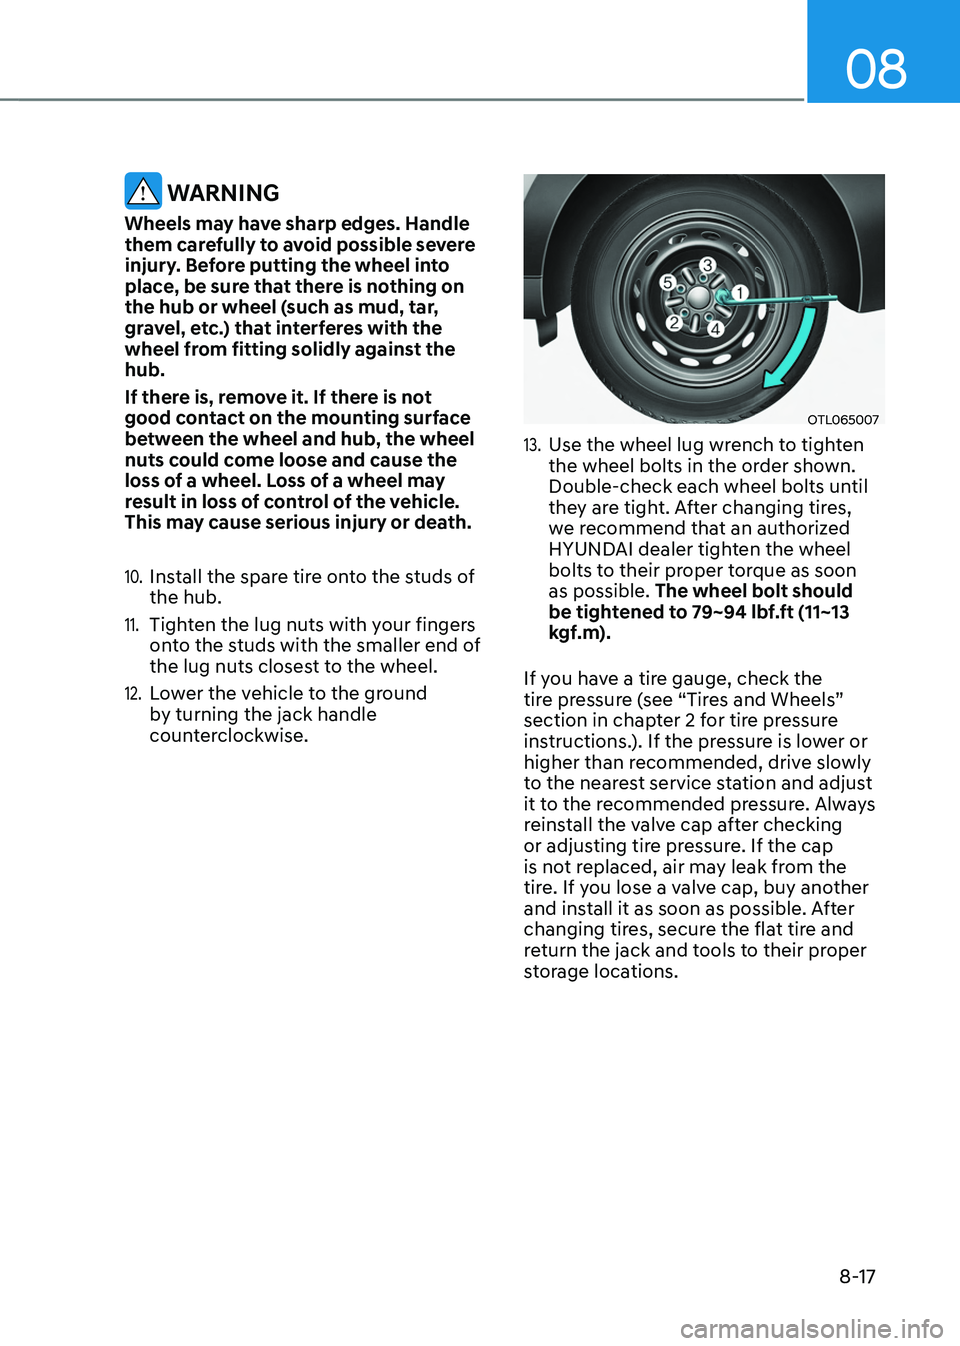 HYUNDAI TUCSON 2022  Owners Manual 08
8-17
 WARNING
Wheels may have sharp edges. Handle 
them carefully to avoid possible severe 
injury. Before putting the wheel into 
place, be sure that there is nothing on 
the hub or wheel (such as